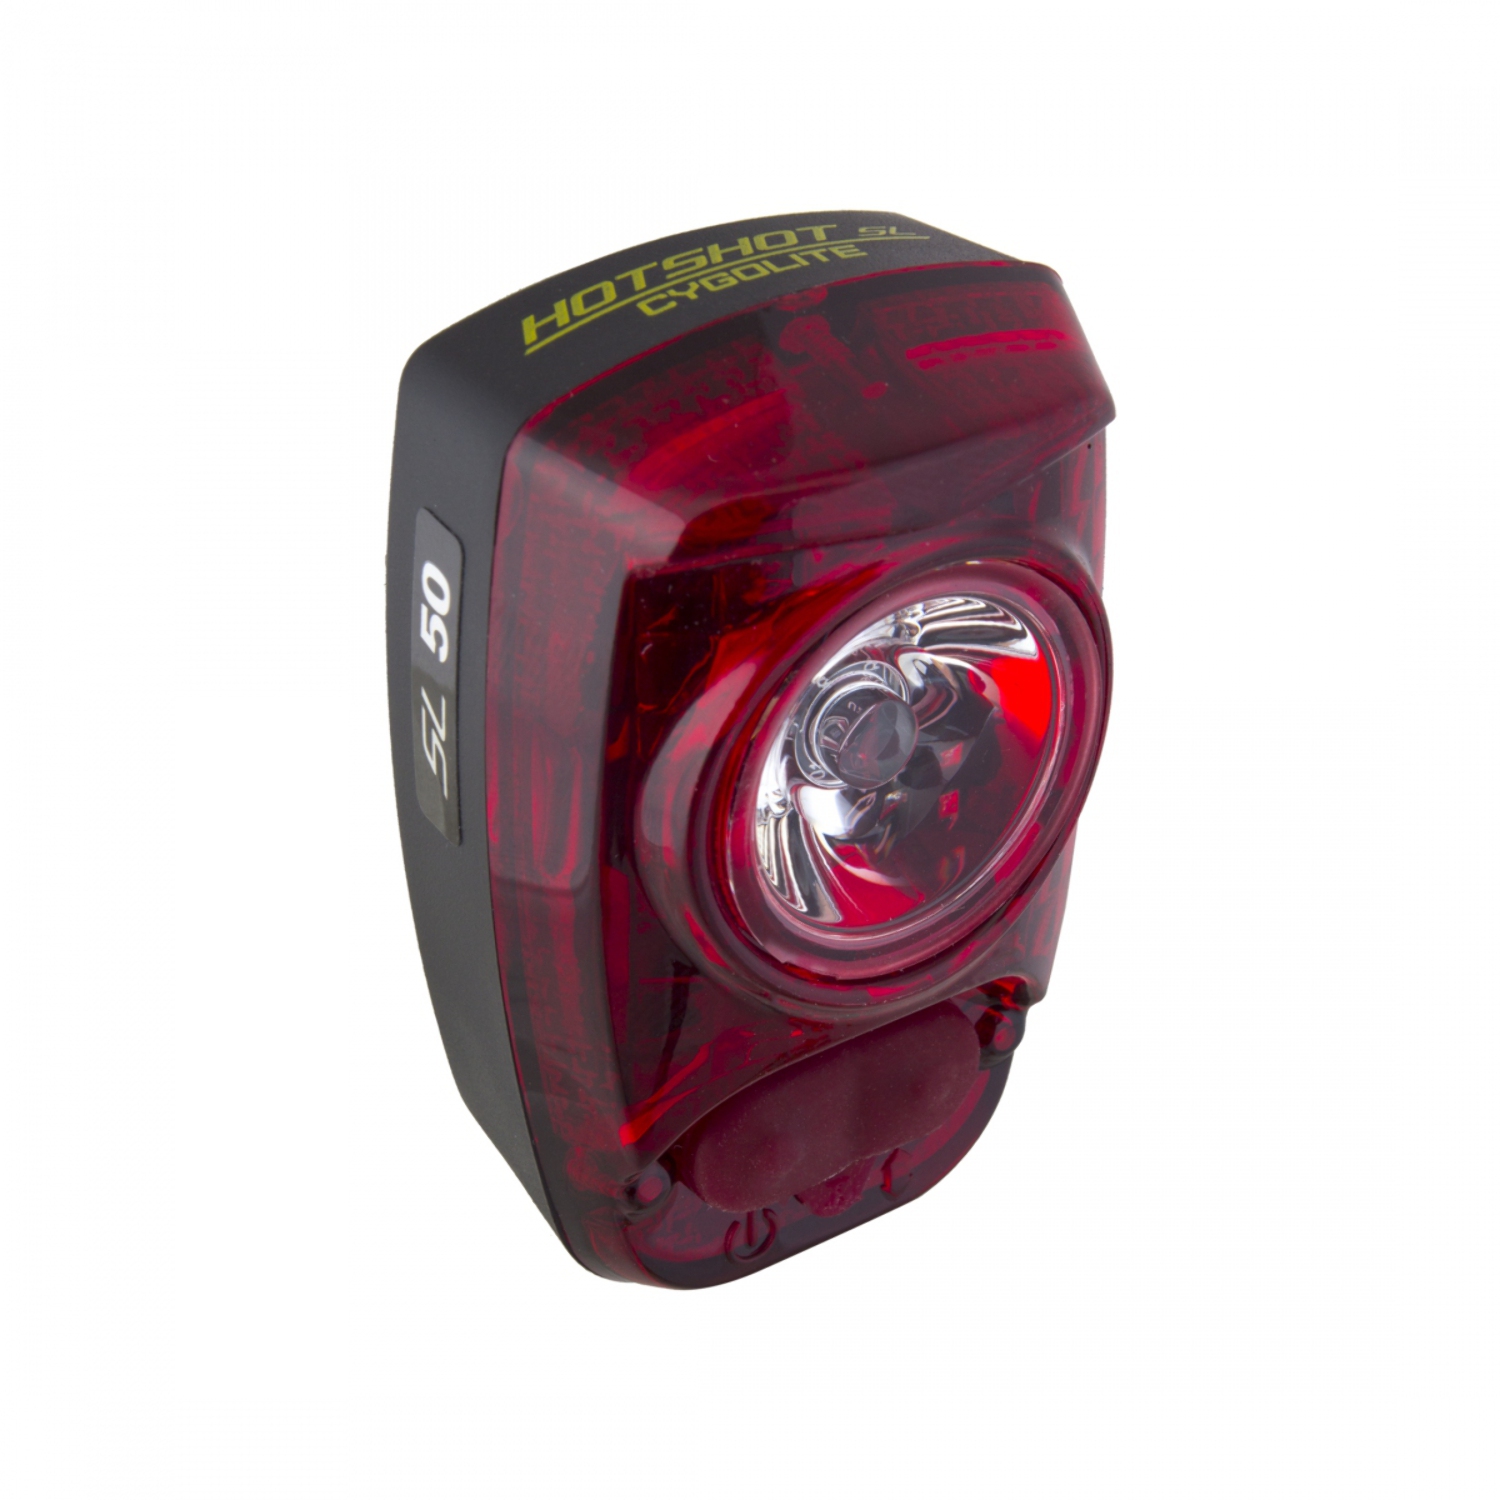 Cygolite Hotshot SL 50 Rechargeable Taillight - image 1 of 3